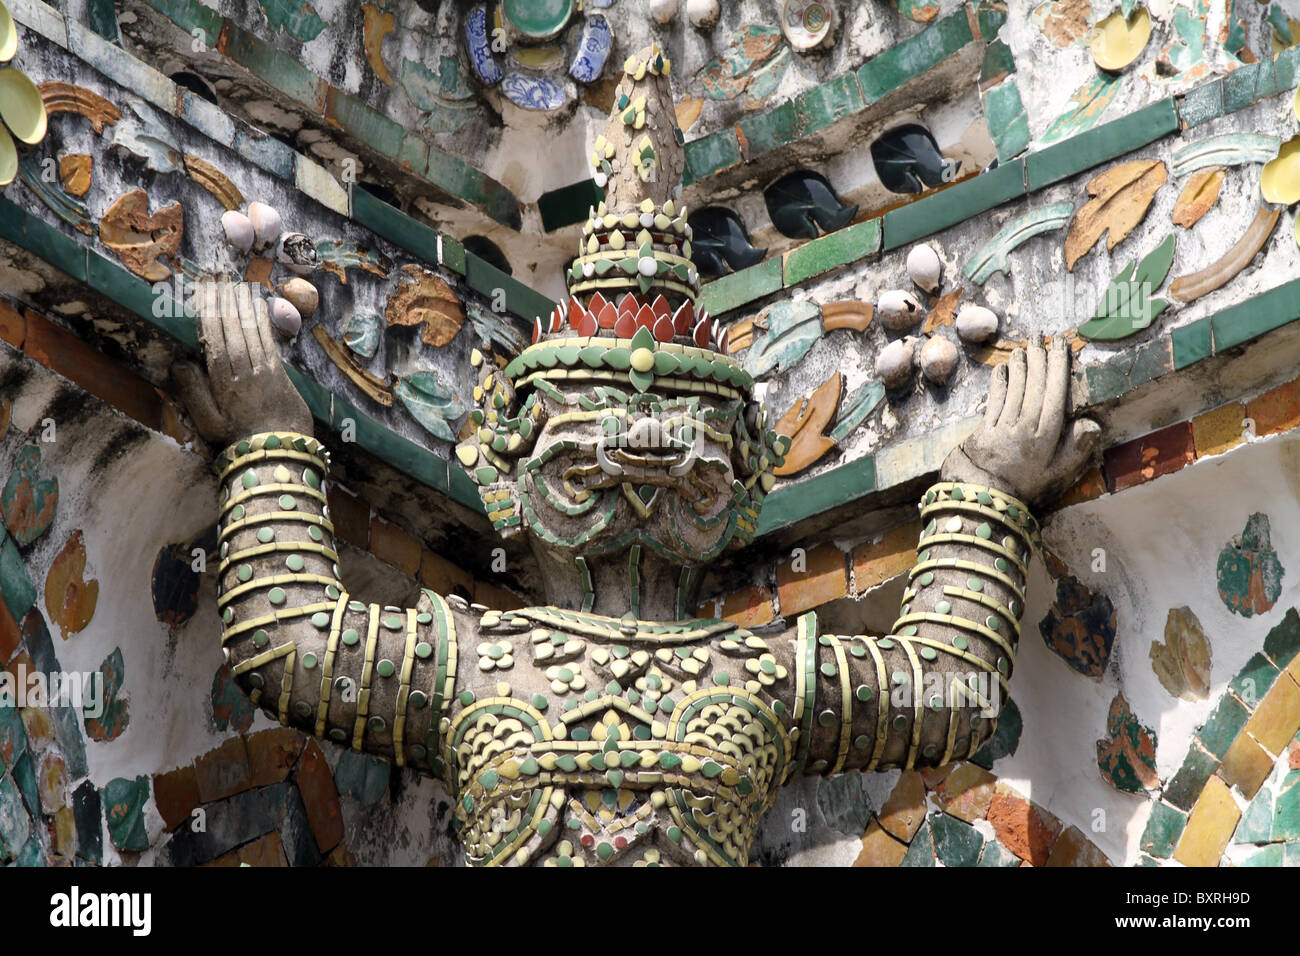 Statue on a Chinese porcelain prang at Wat Arun, Temple of the Dawn in Bangkok, Thailand Stock Photo